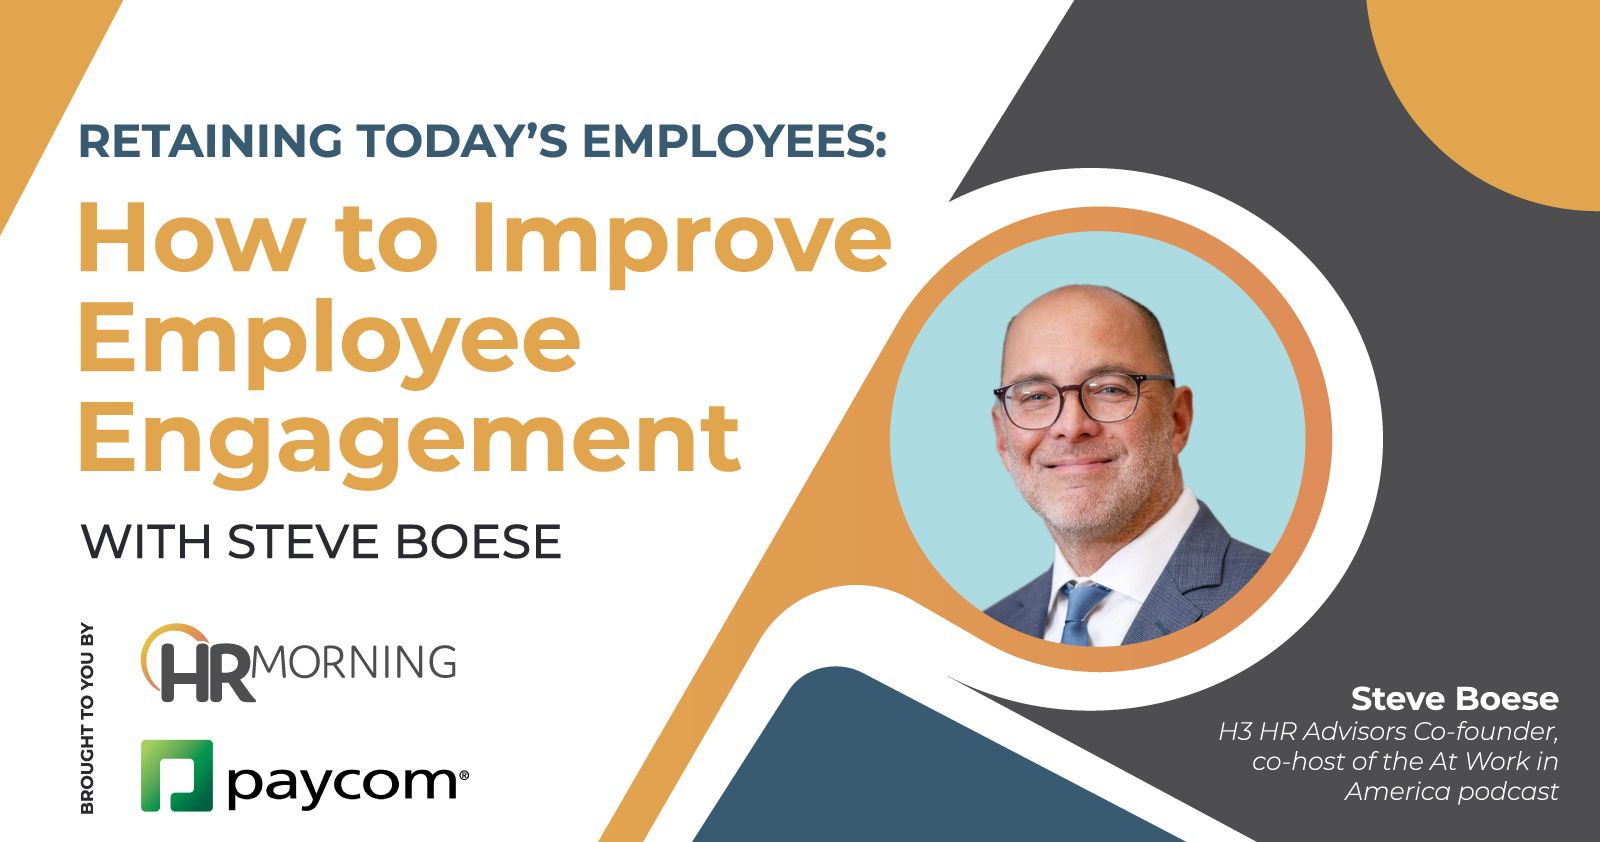 “Retaining Today’s Employees: How to Improve Employee Engagement With Steve Boese Steve Boese (line break) H3 HR Advisors Co-founder, co-host of the At Work in America podcast brought to you by *PayCom* *HRMorning Logo*